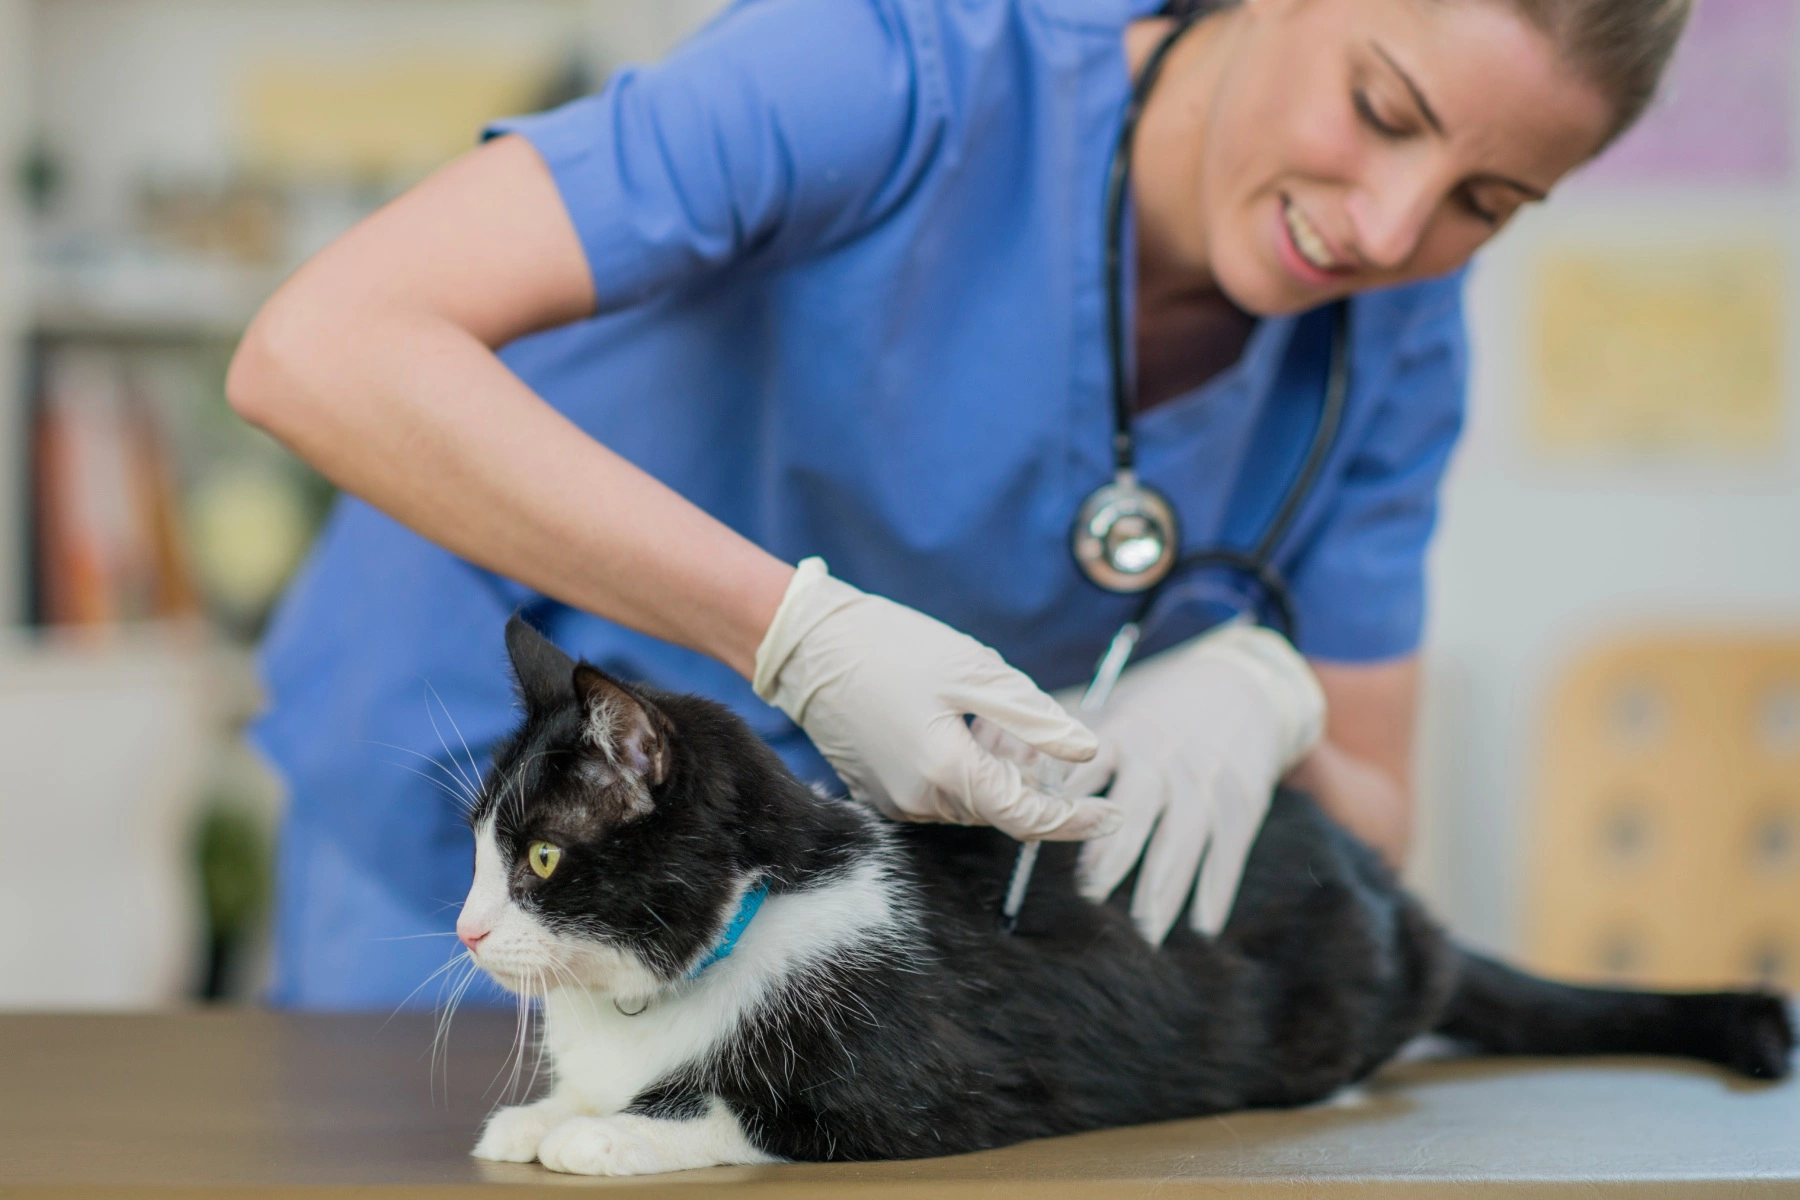 a female veterinarian wearing medical clothing and looking down as she vaccinates a black and white cat on a table